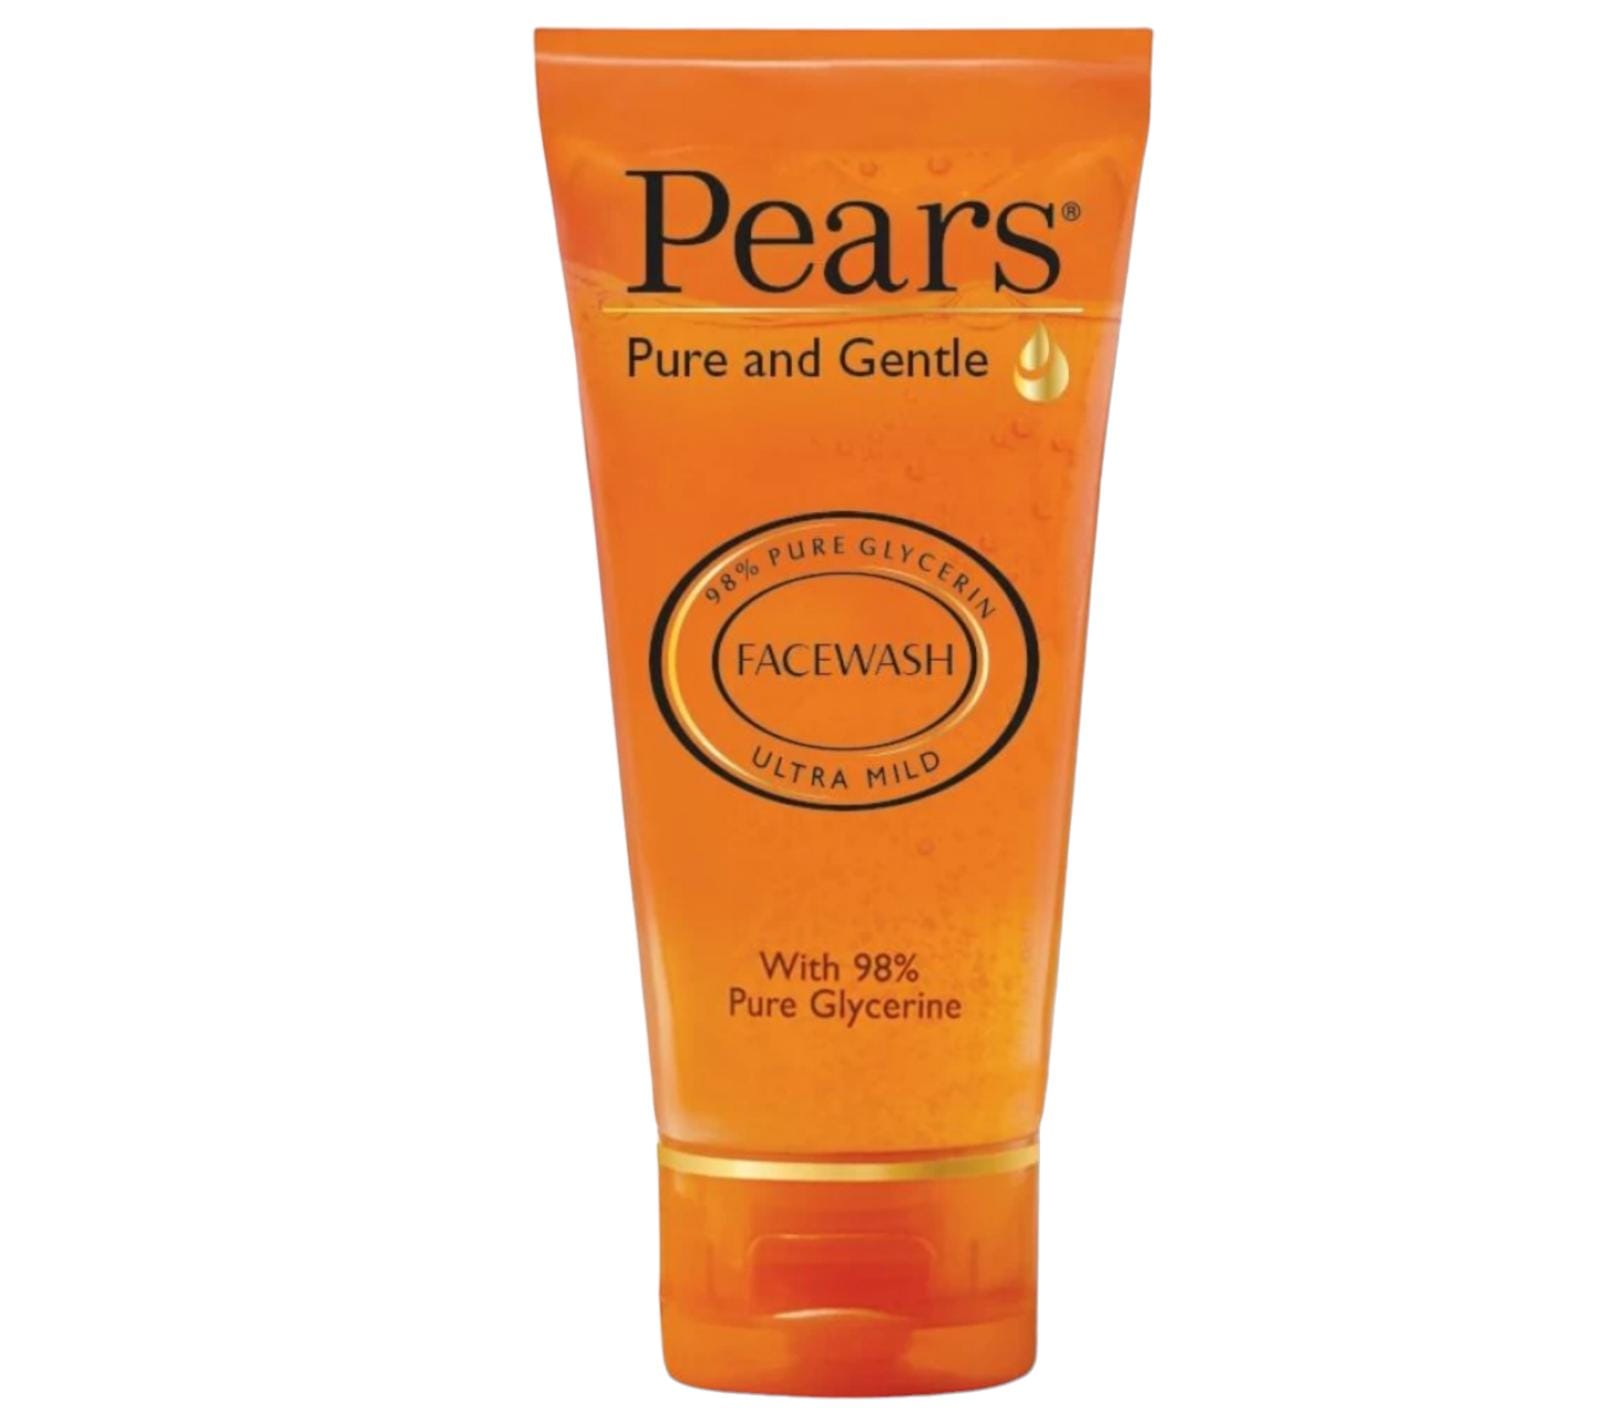 Pears Pure And Gentle Face wash